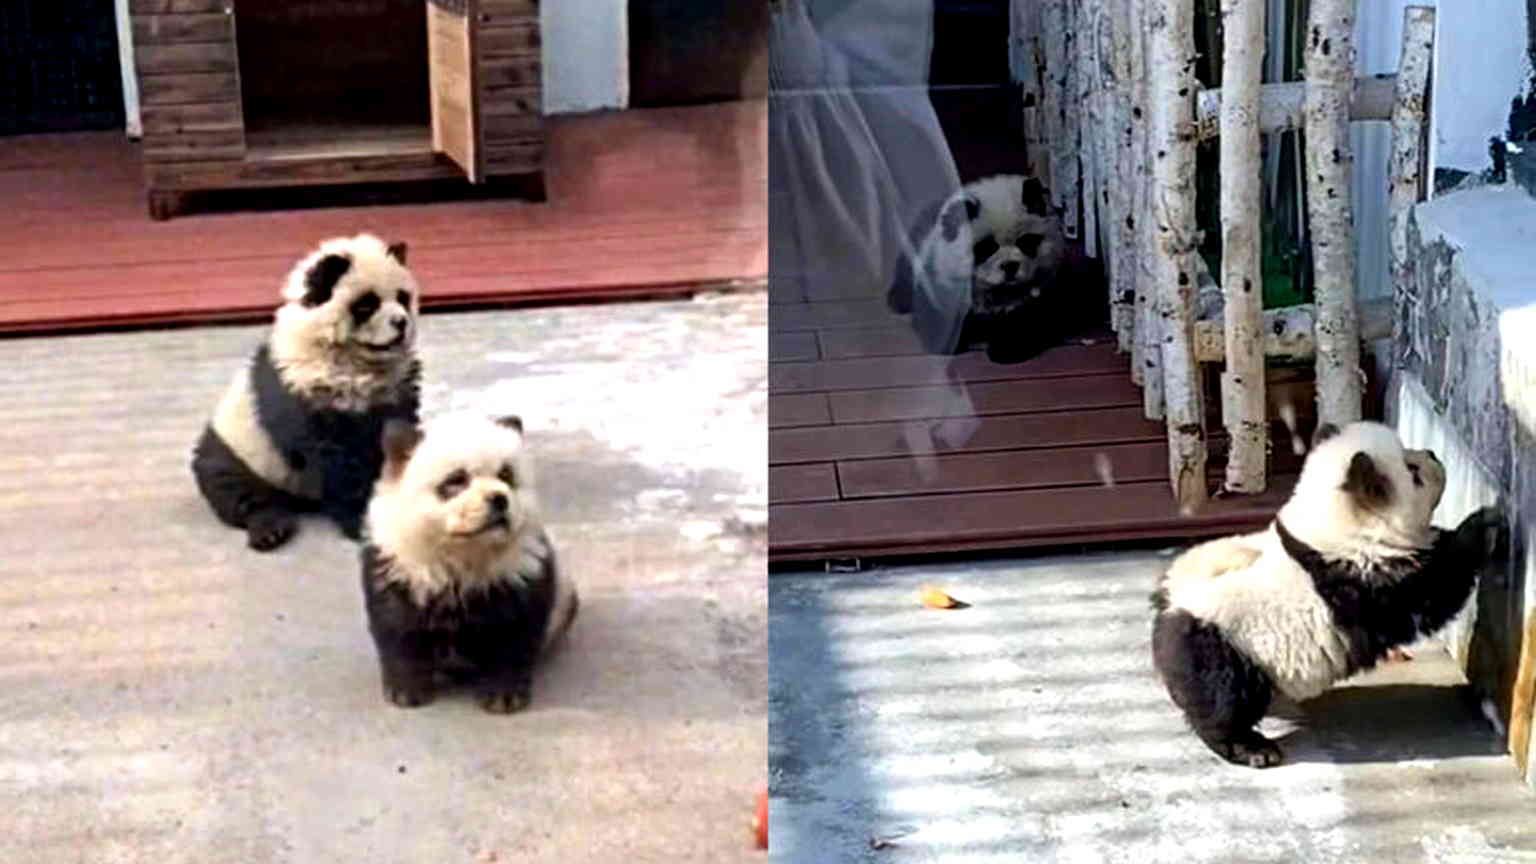 Look: Chinese zoo debuts dyed Chow Chows as ‘panda dogs’